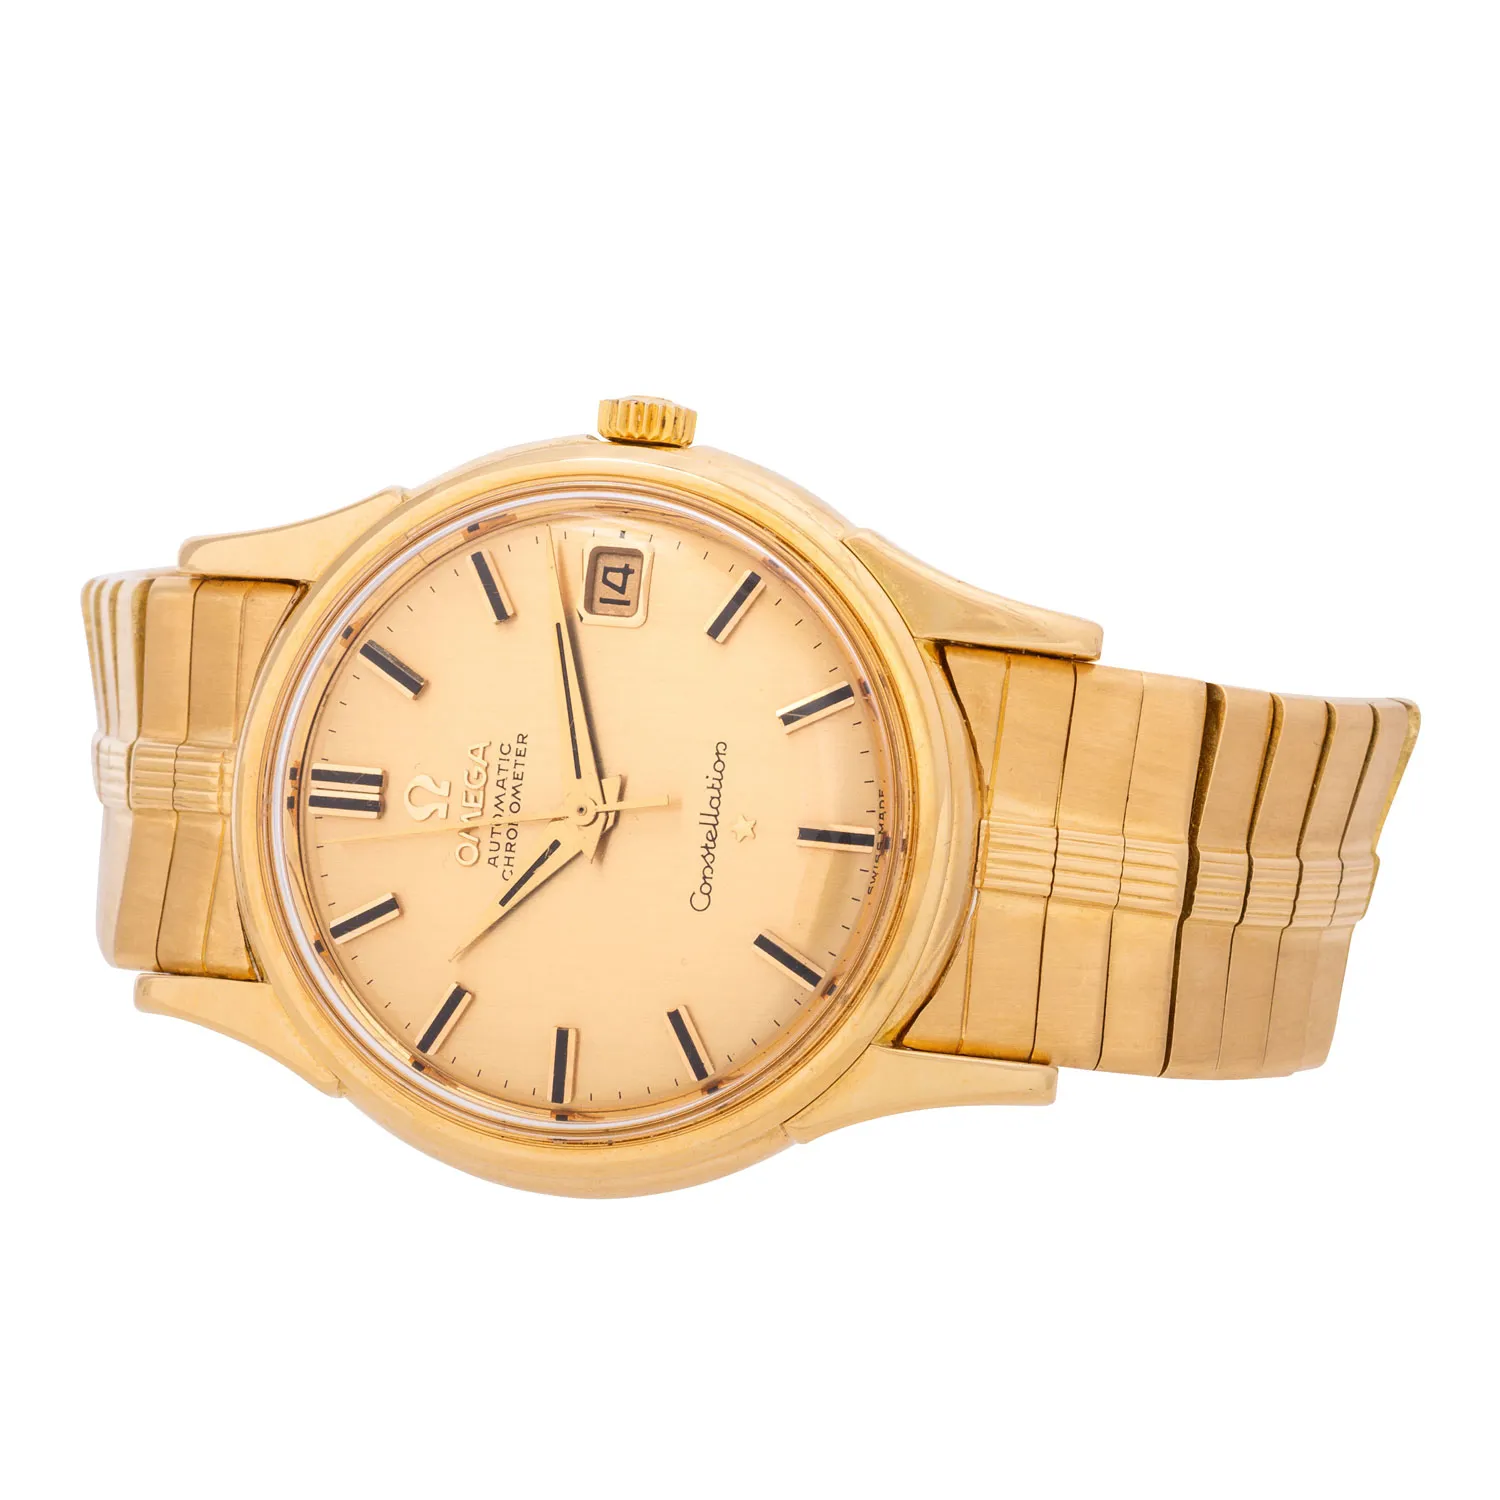 Omega Constellation 14393 35mm Yellow gold Gold 6